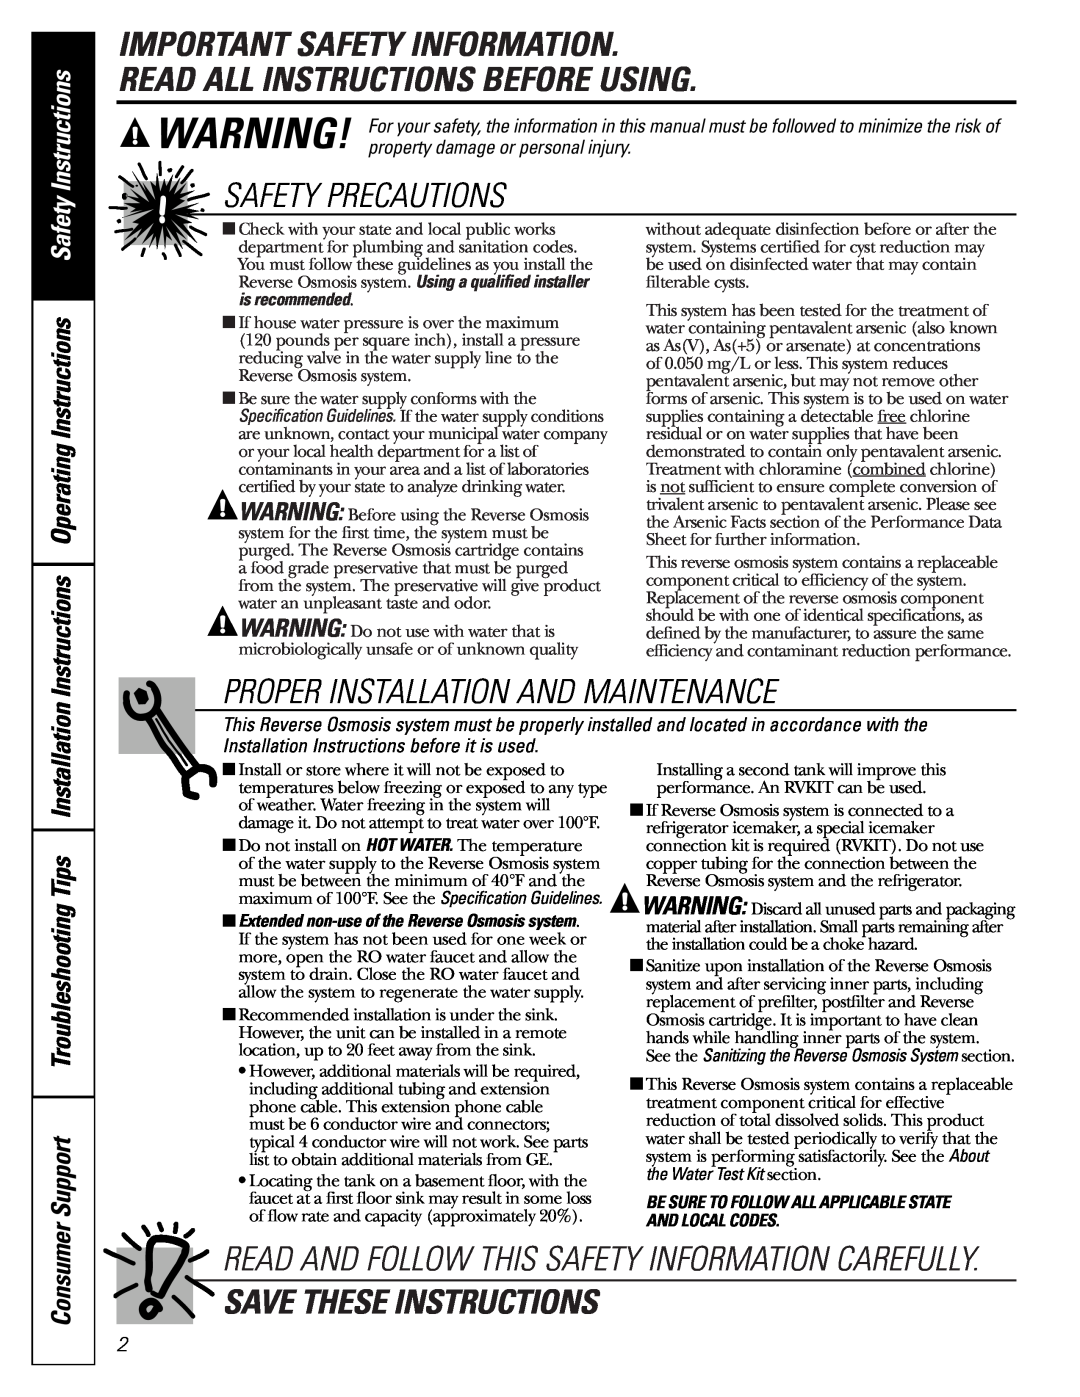 GE PNRQ21LBN Important Safety Information Read All Instructions Before Using, Safety Precautions, Save These Instructions 